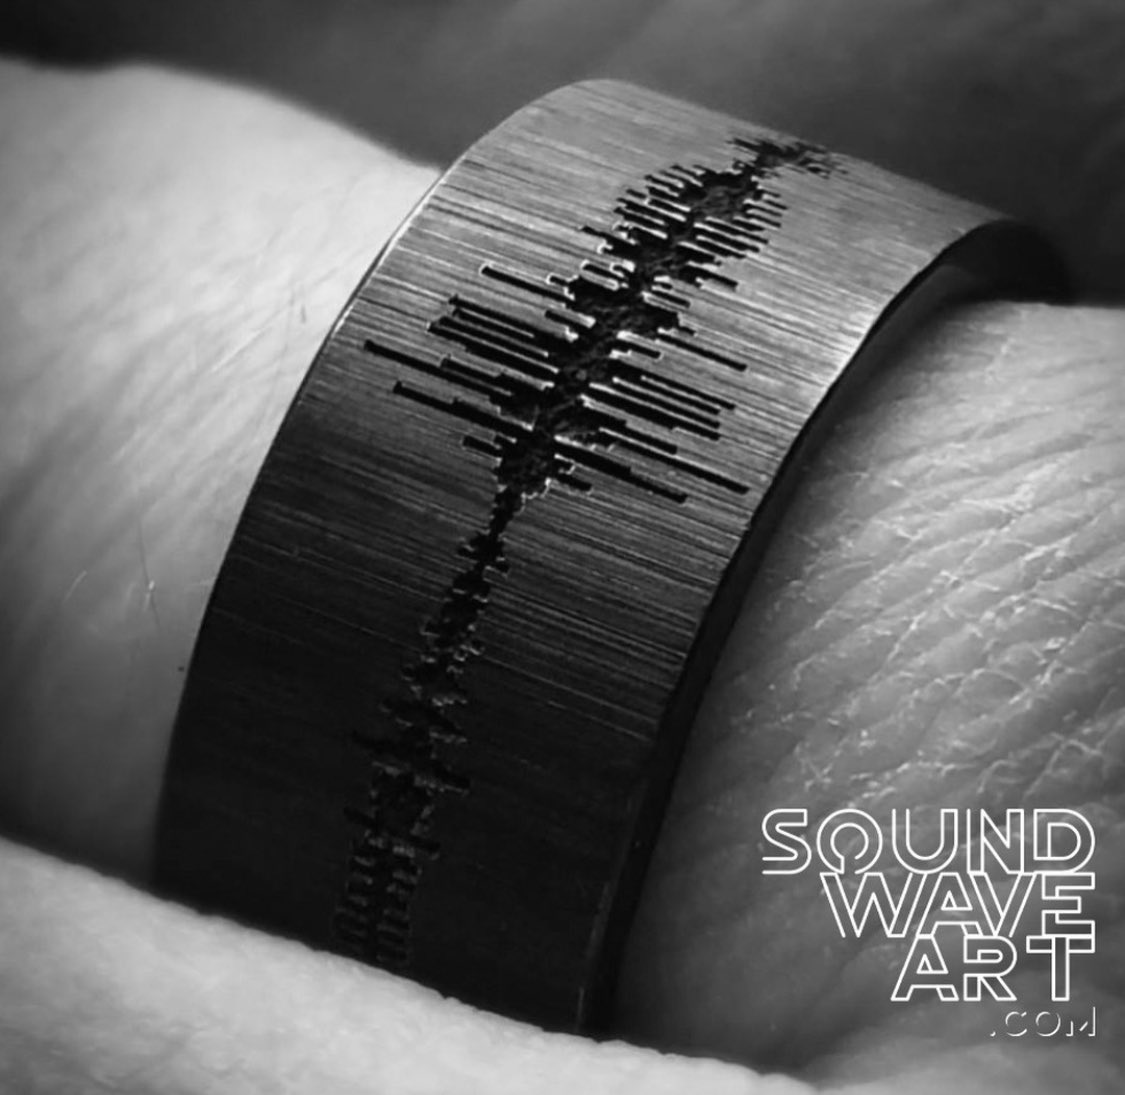 Soundwave rings - engraved with your voice pattern. Soundwaveart.com

#soundwaverings #soundwavejewelry #weddingbands #weddingrings #rings #wedding